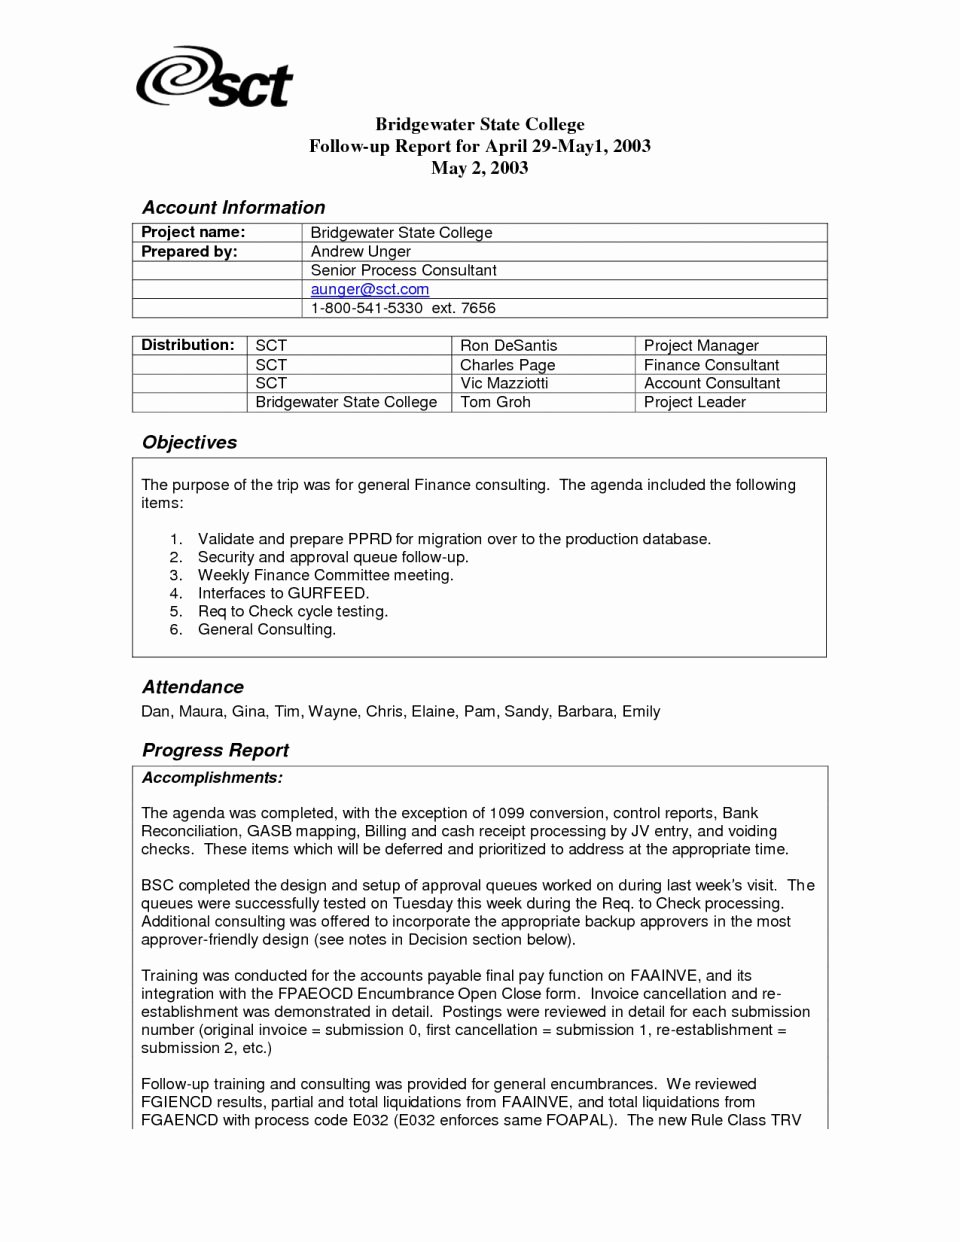 Business Trip Report Template Lovely Army Trip Reportte Word Microsoft Free Usmc Business